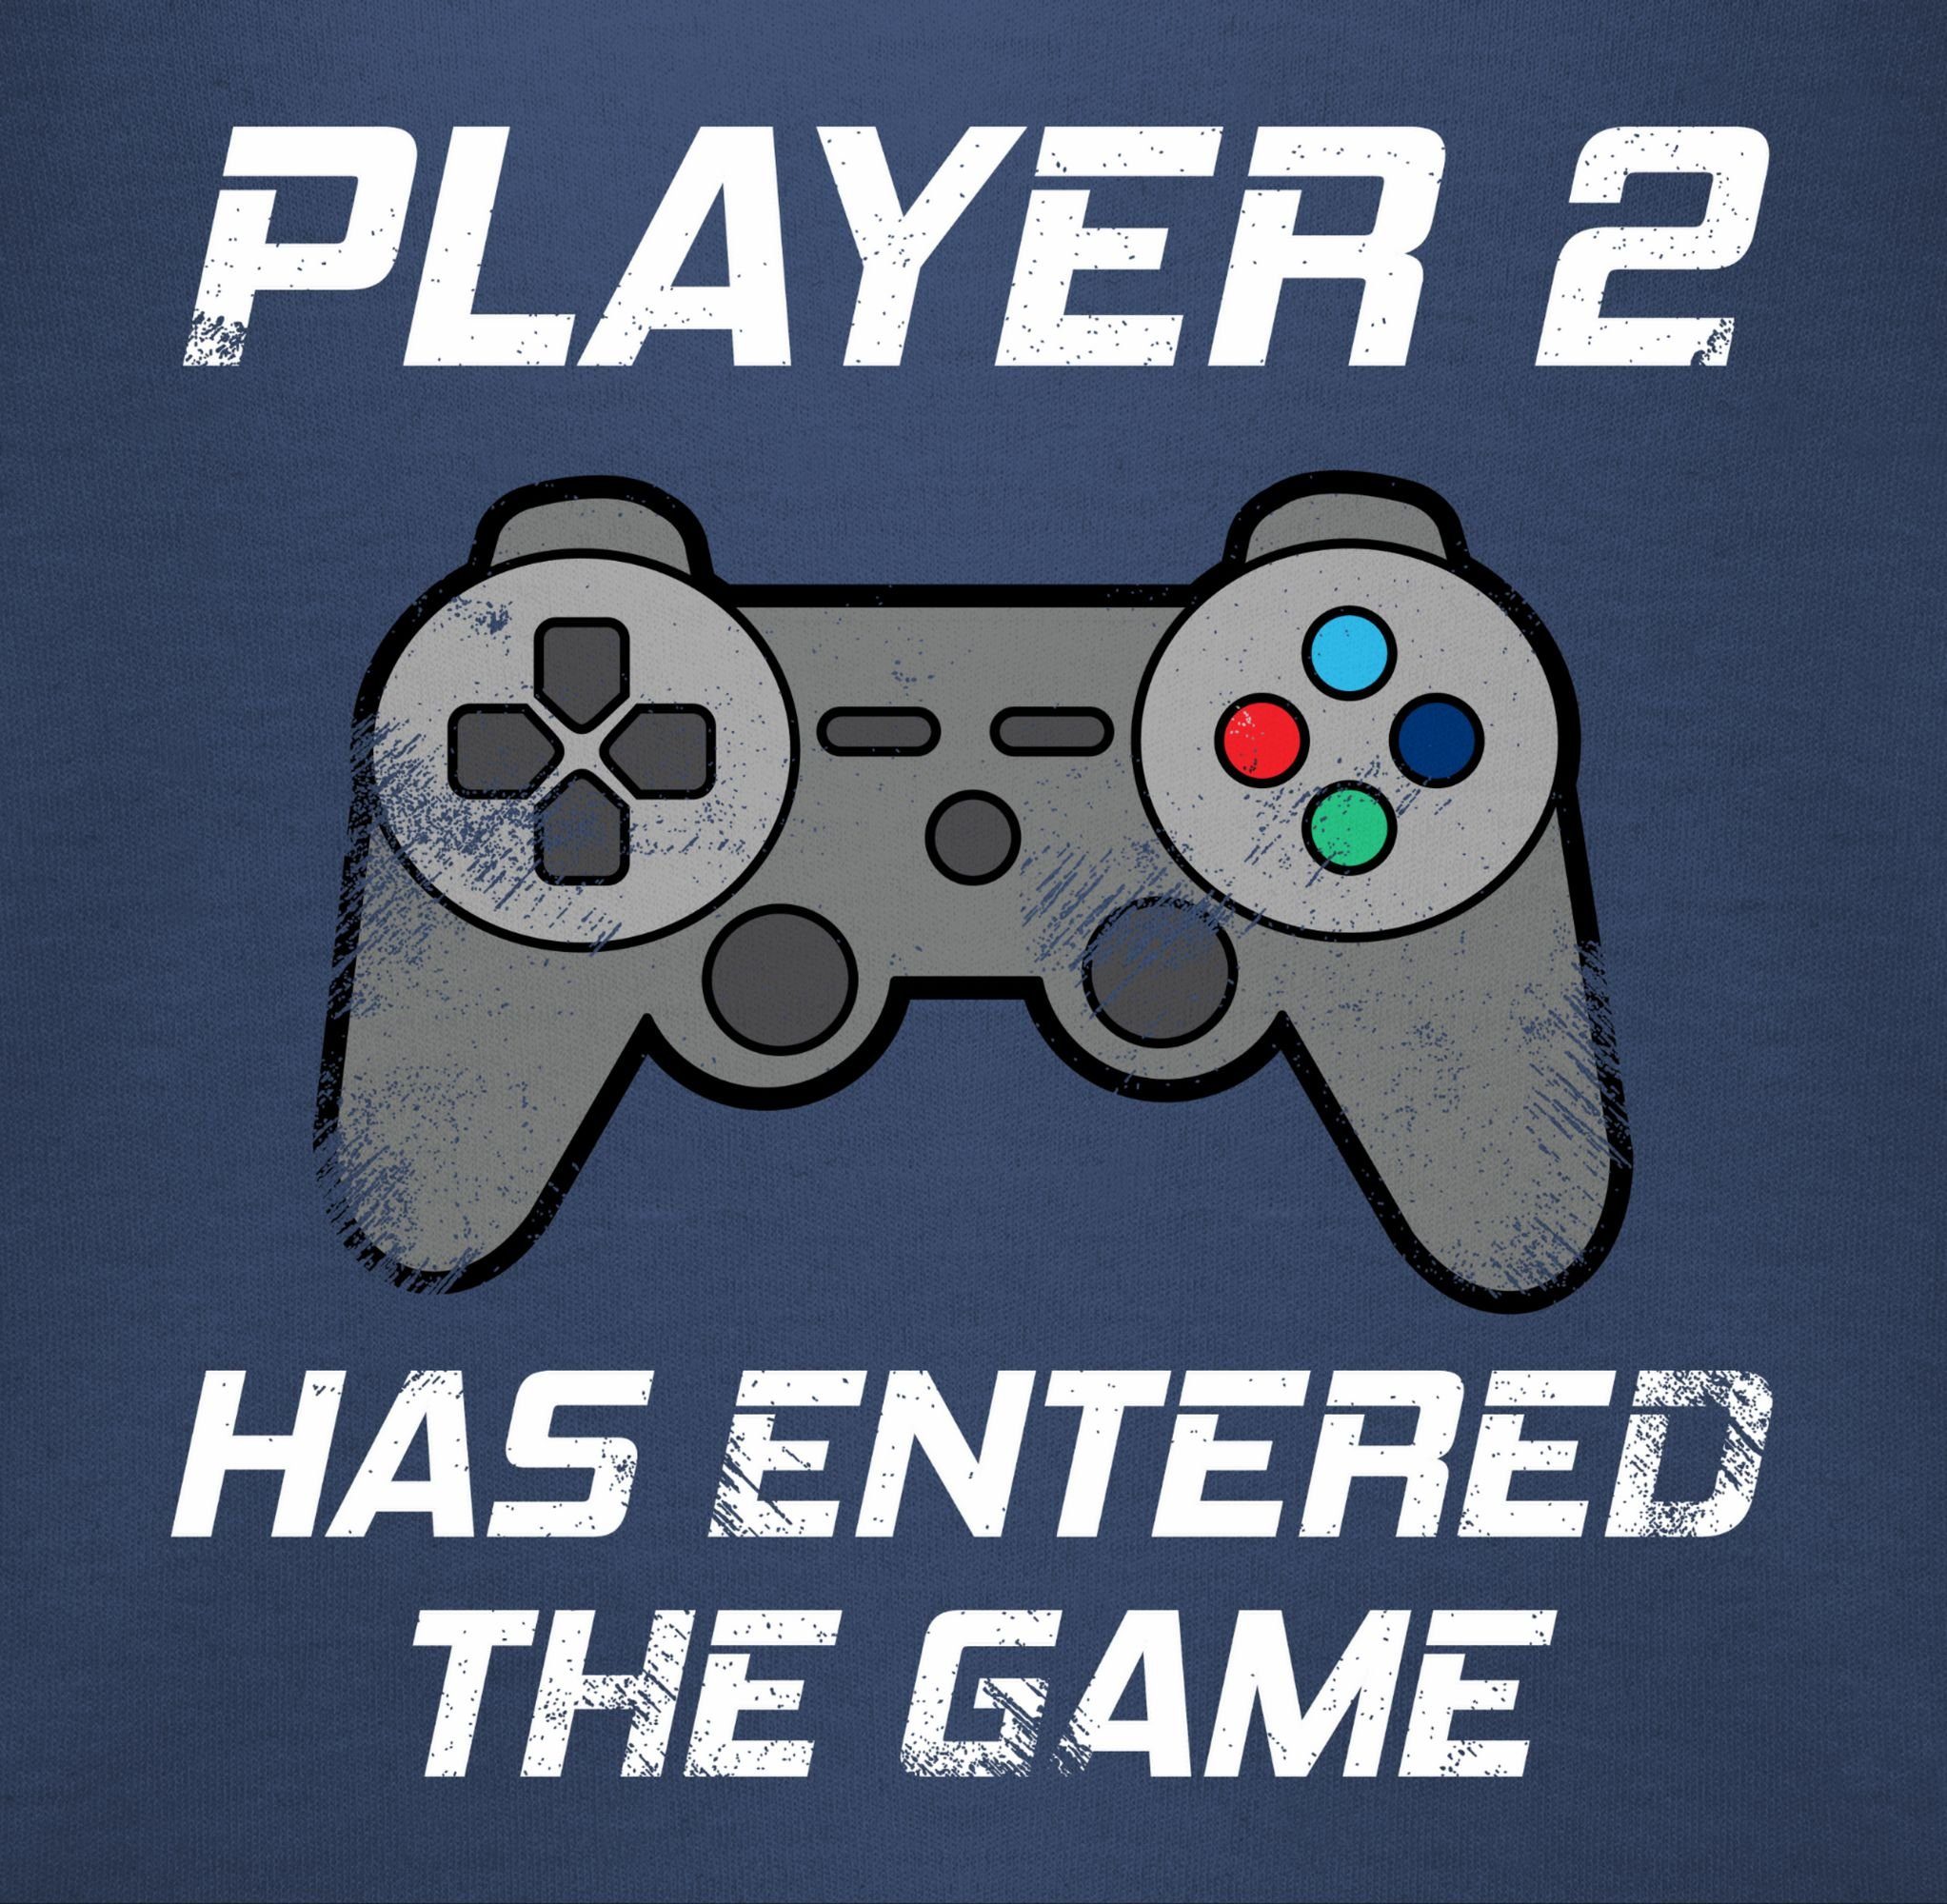 Blau Player grau the 2 entered Familie Shirtracer Navy Baby Shirtbody 2 has game Partner-Look Controller